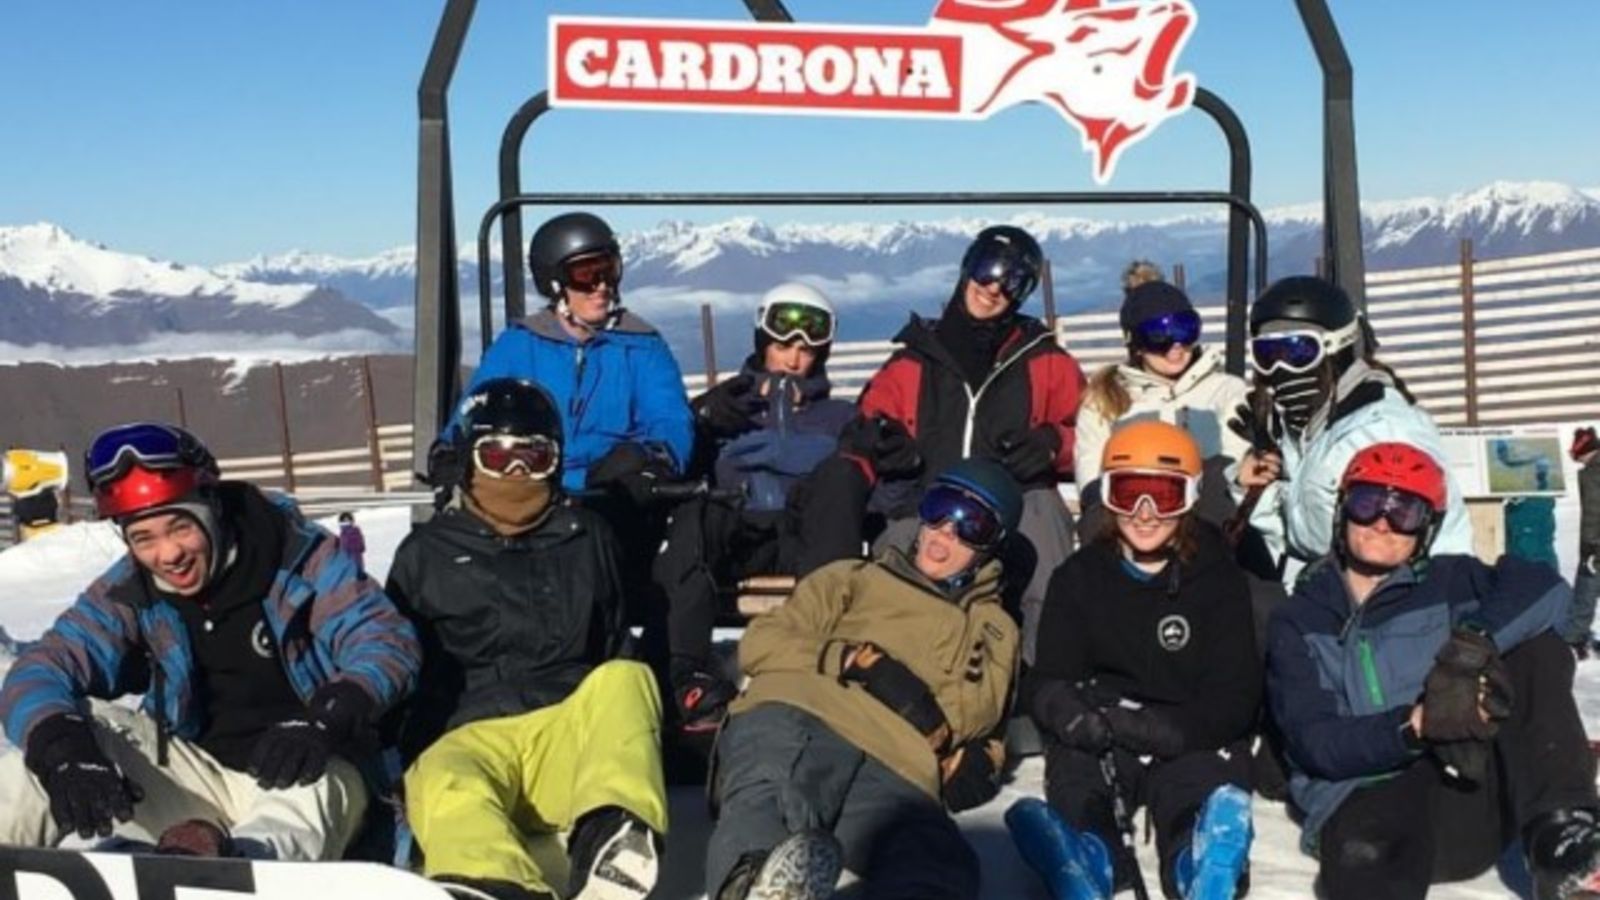 Group picture of students in ski gear at Cardrona ski fields.